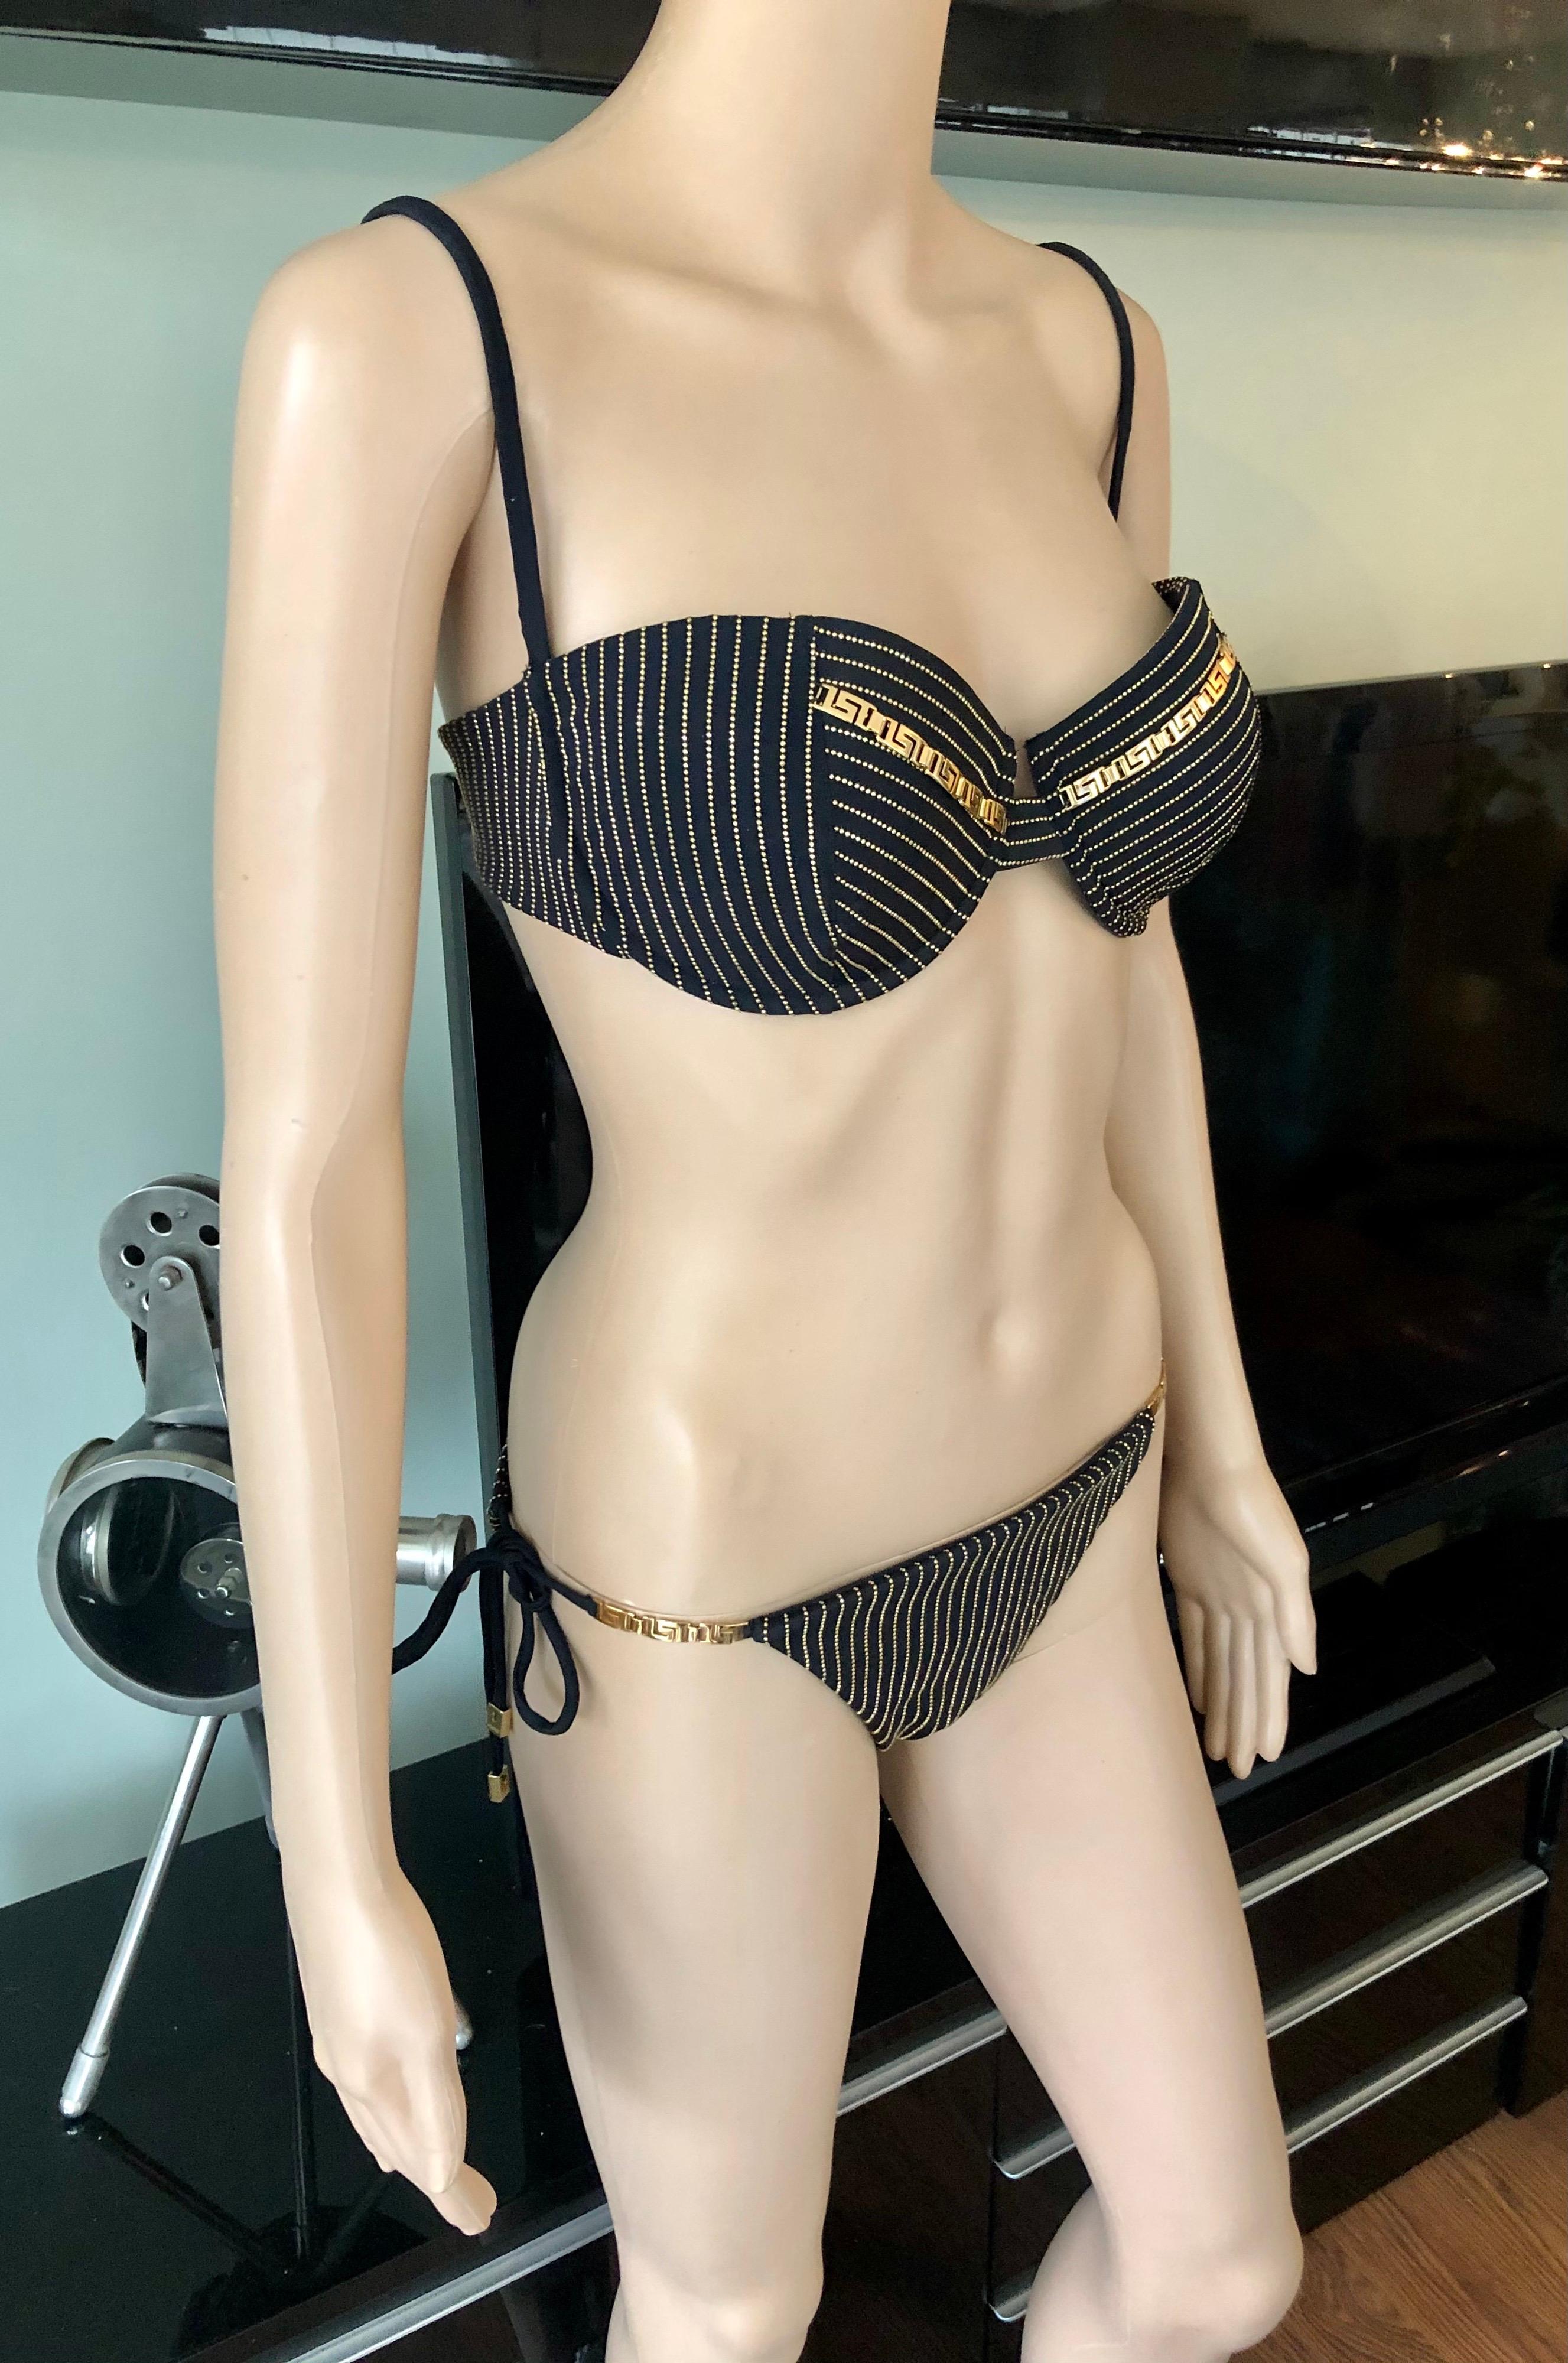 Versace Crystal Embellished Two-Piece Bikini Set Swimsuit Swimwear 

Excellent Condition. Like New.